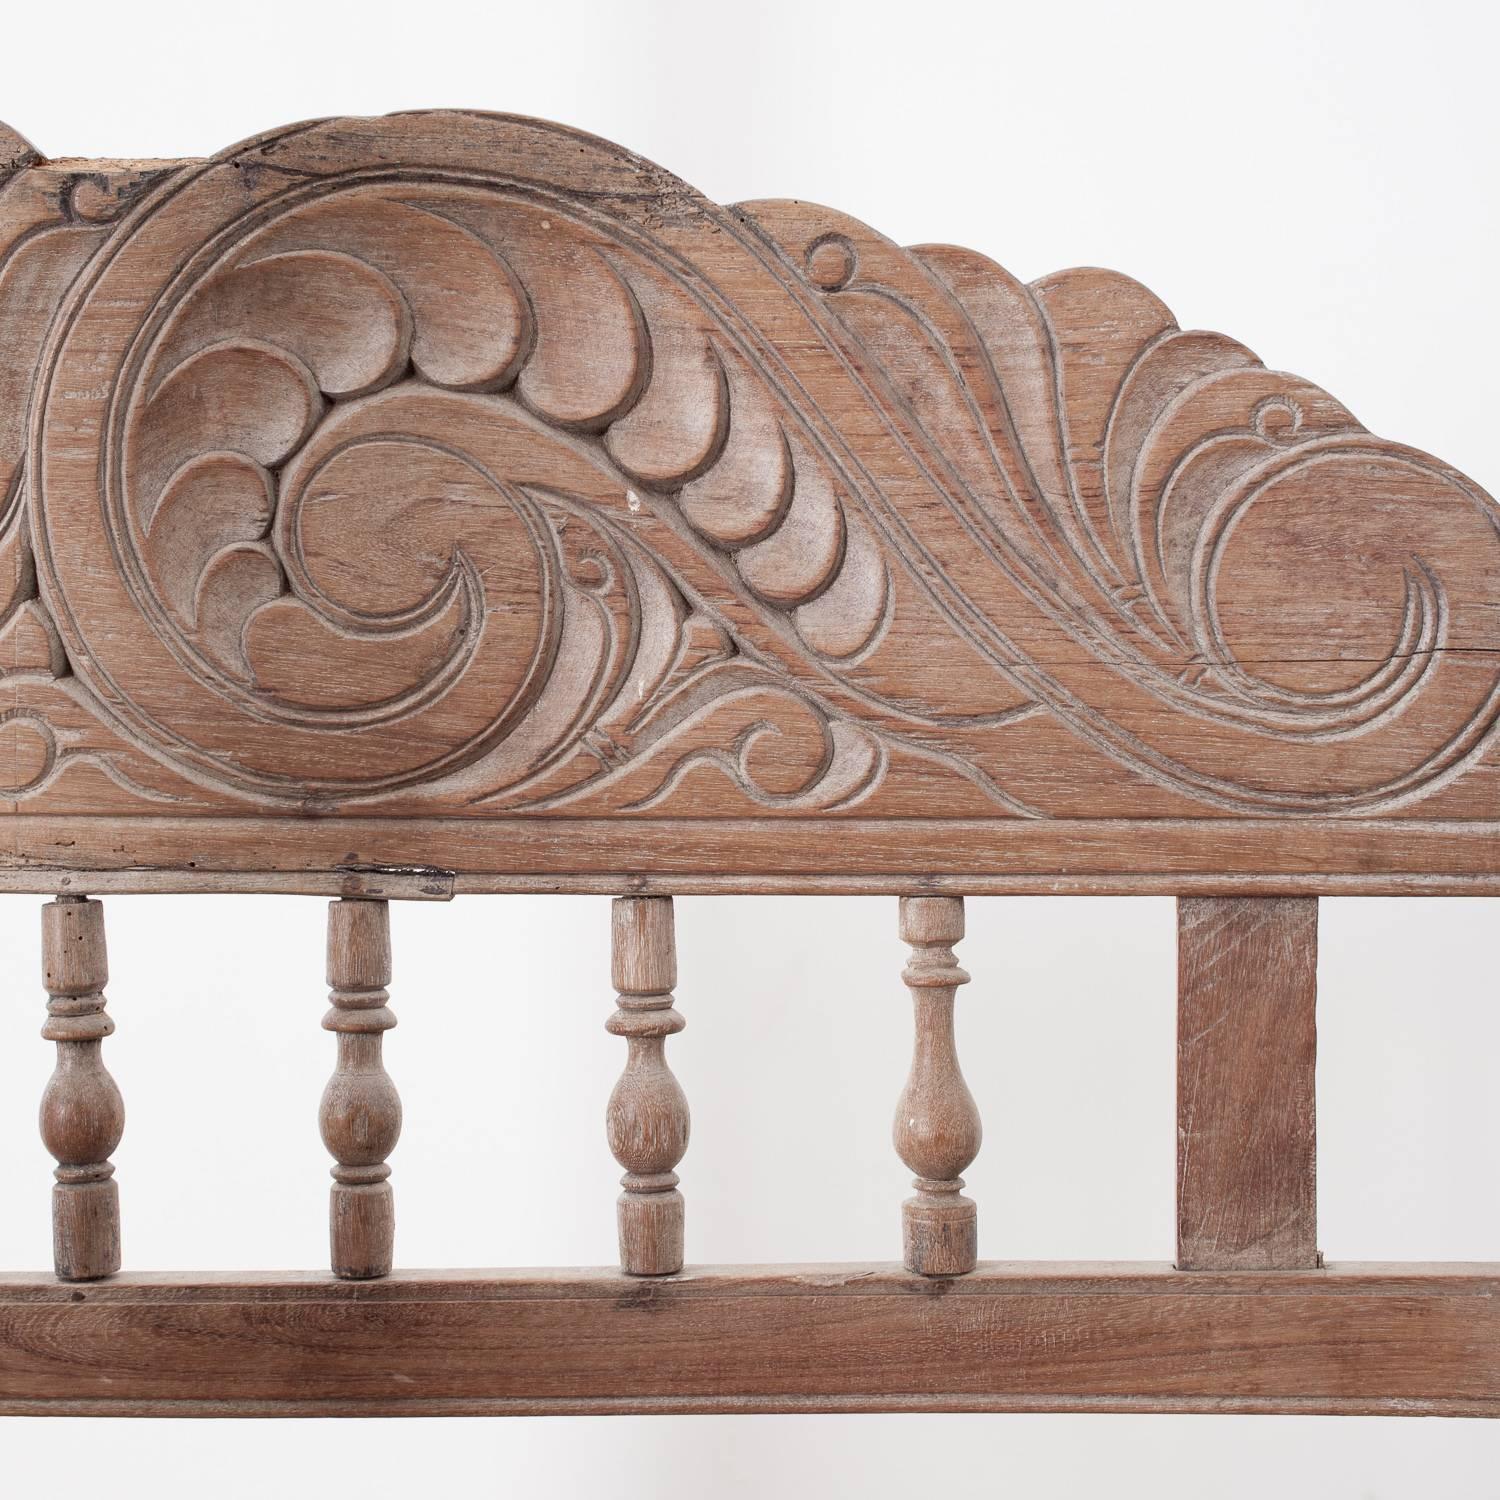 19th Century Rosewood and Teak Bed from Western Rajasthan, India 3